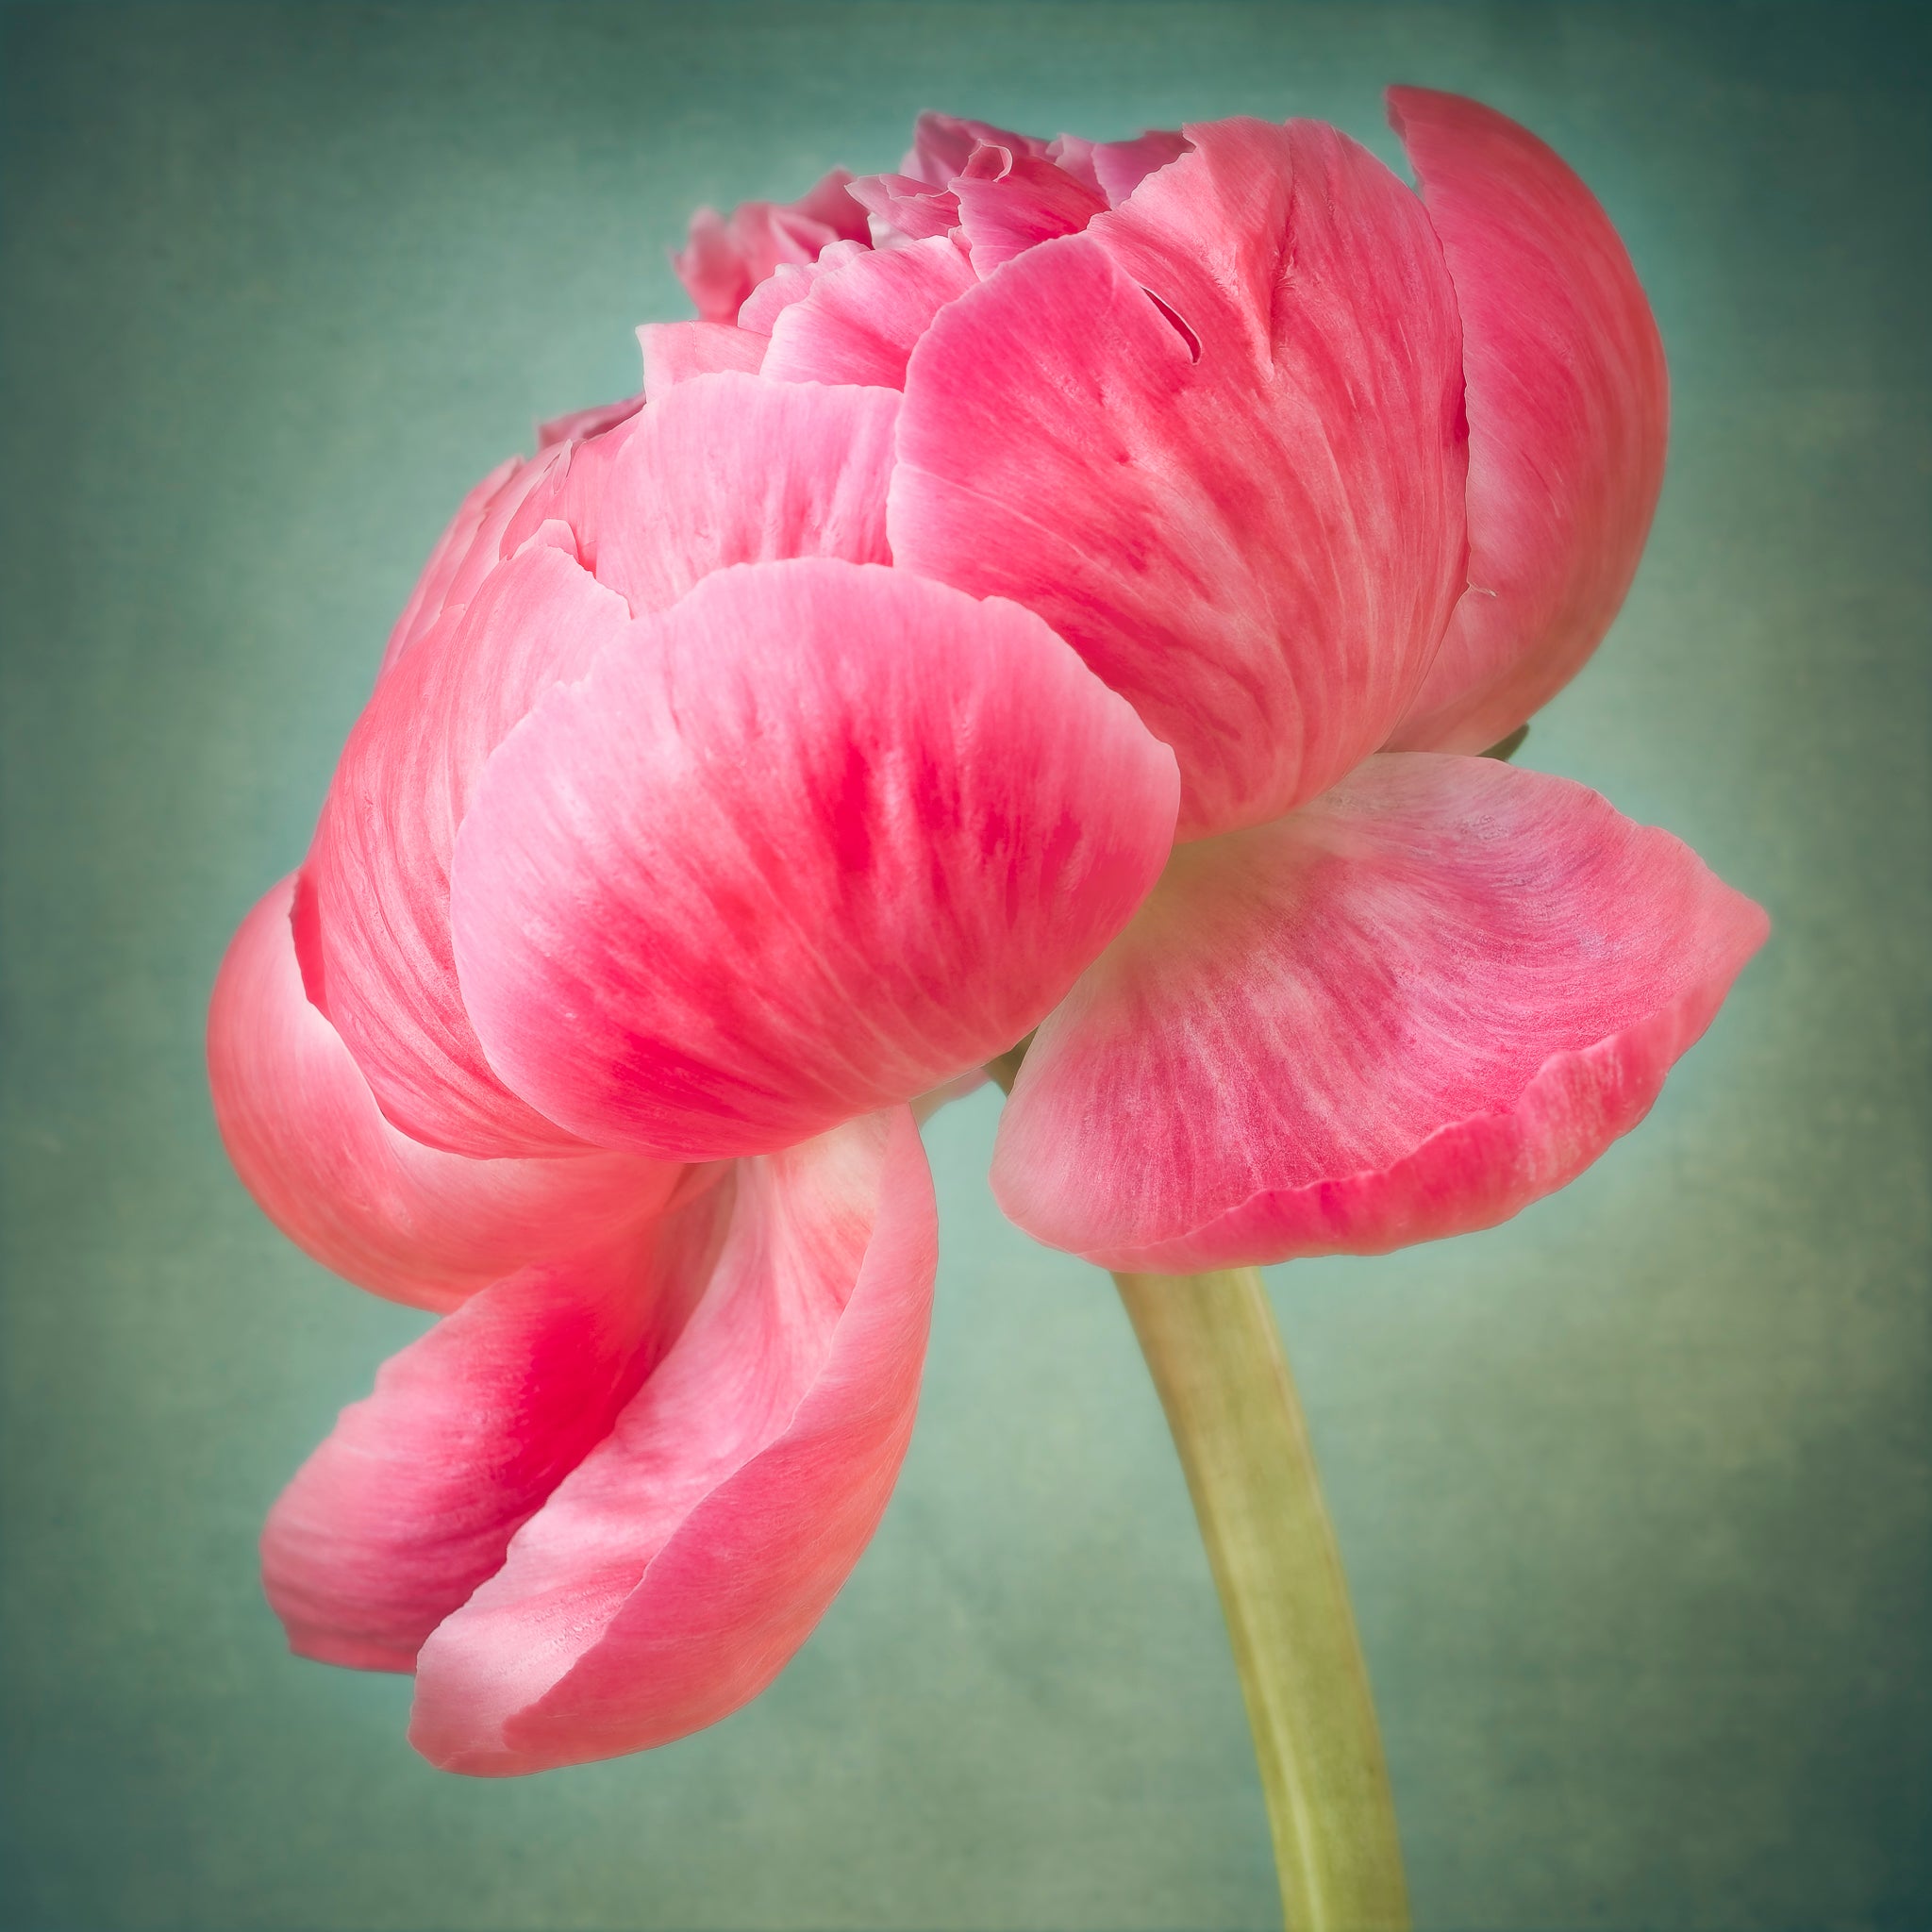 Photograph of a pink peony flower on a greenish background by photographer Cameron Dreaux. 